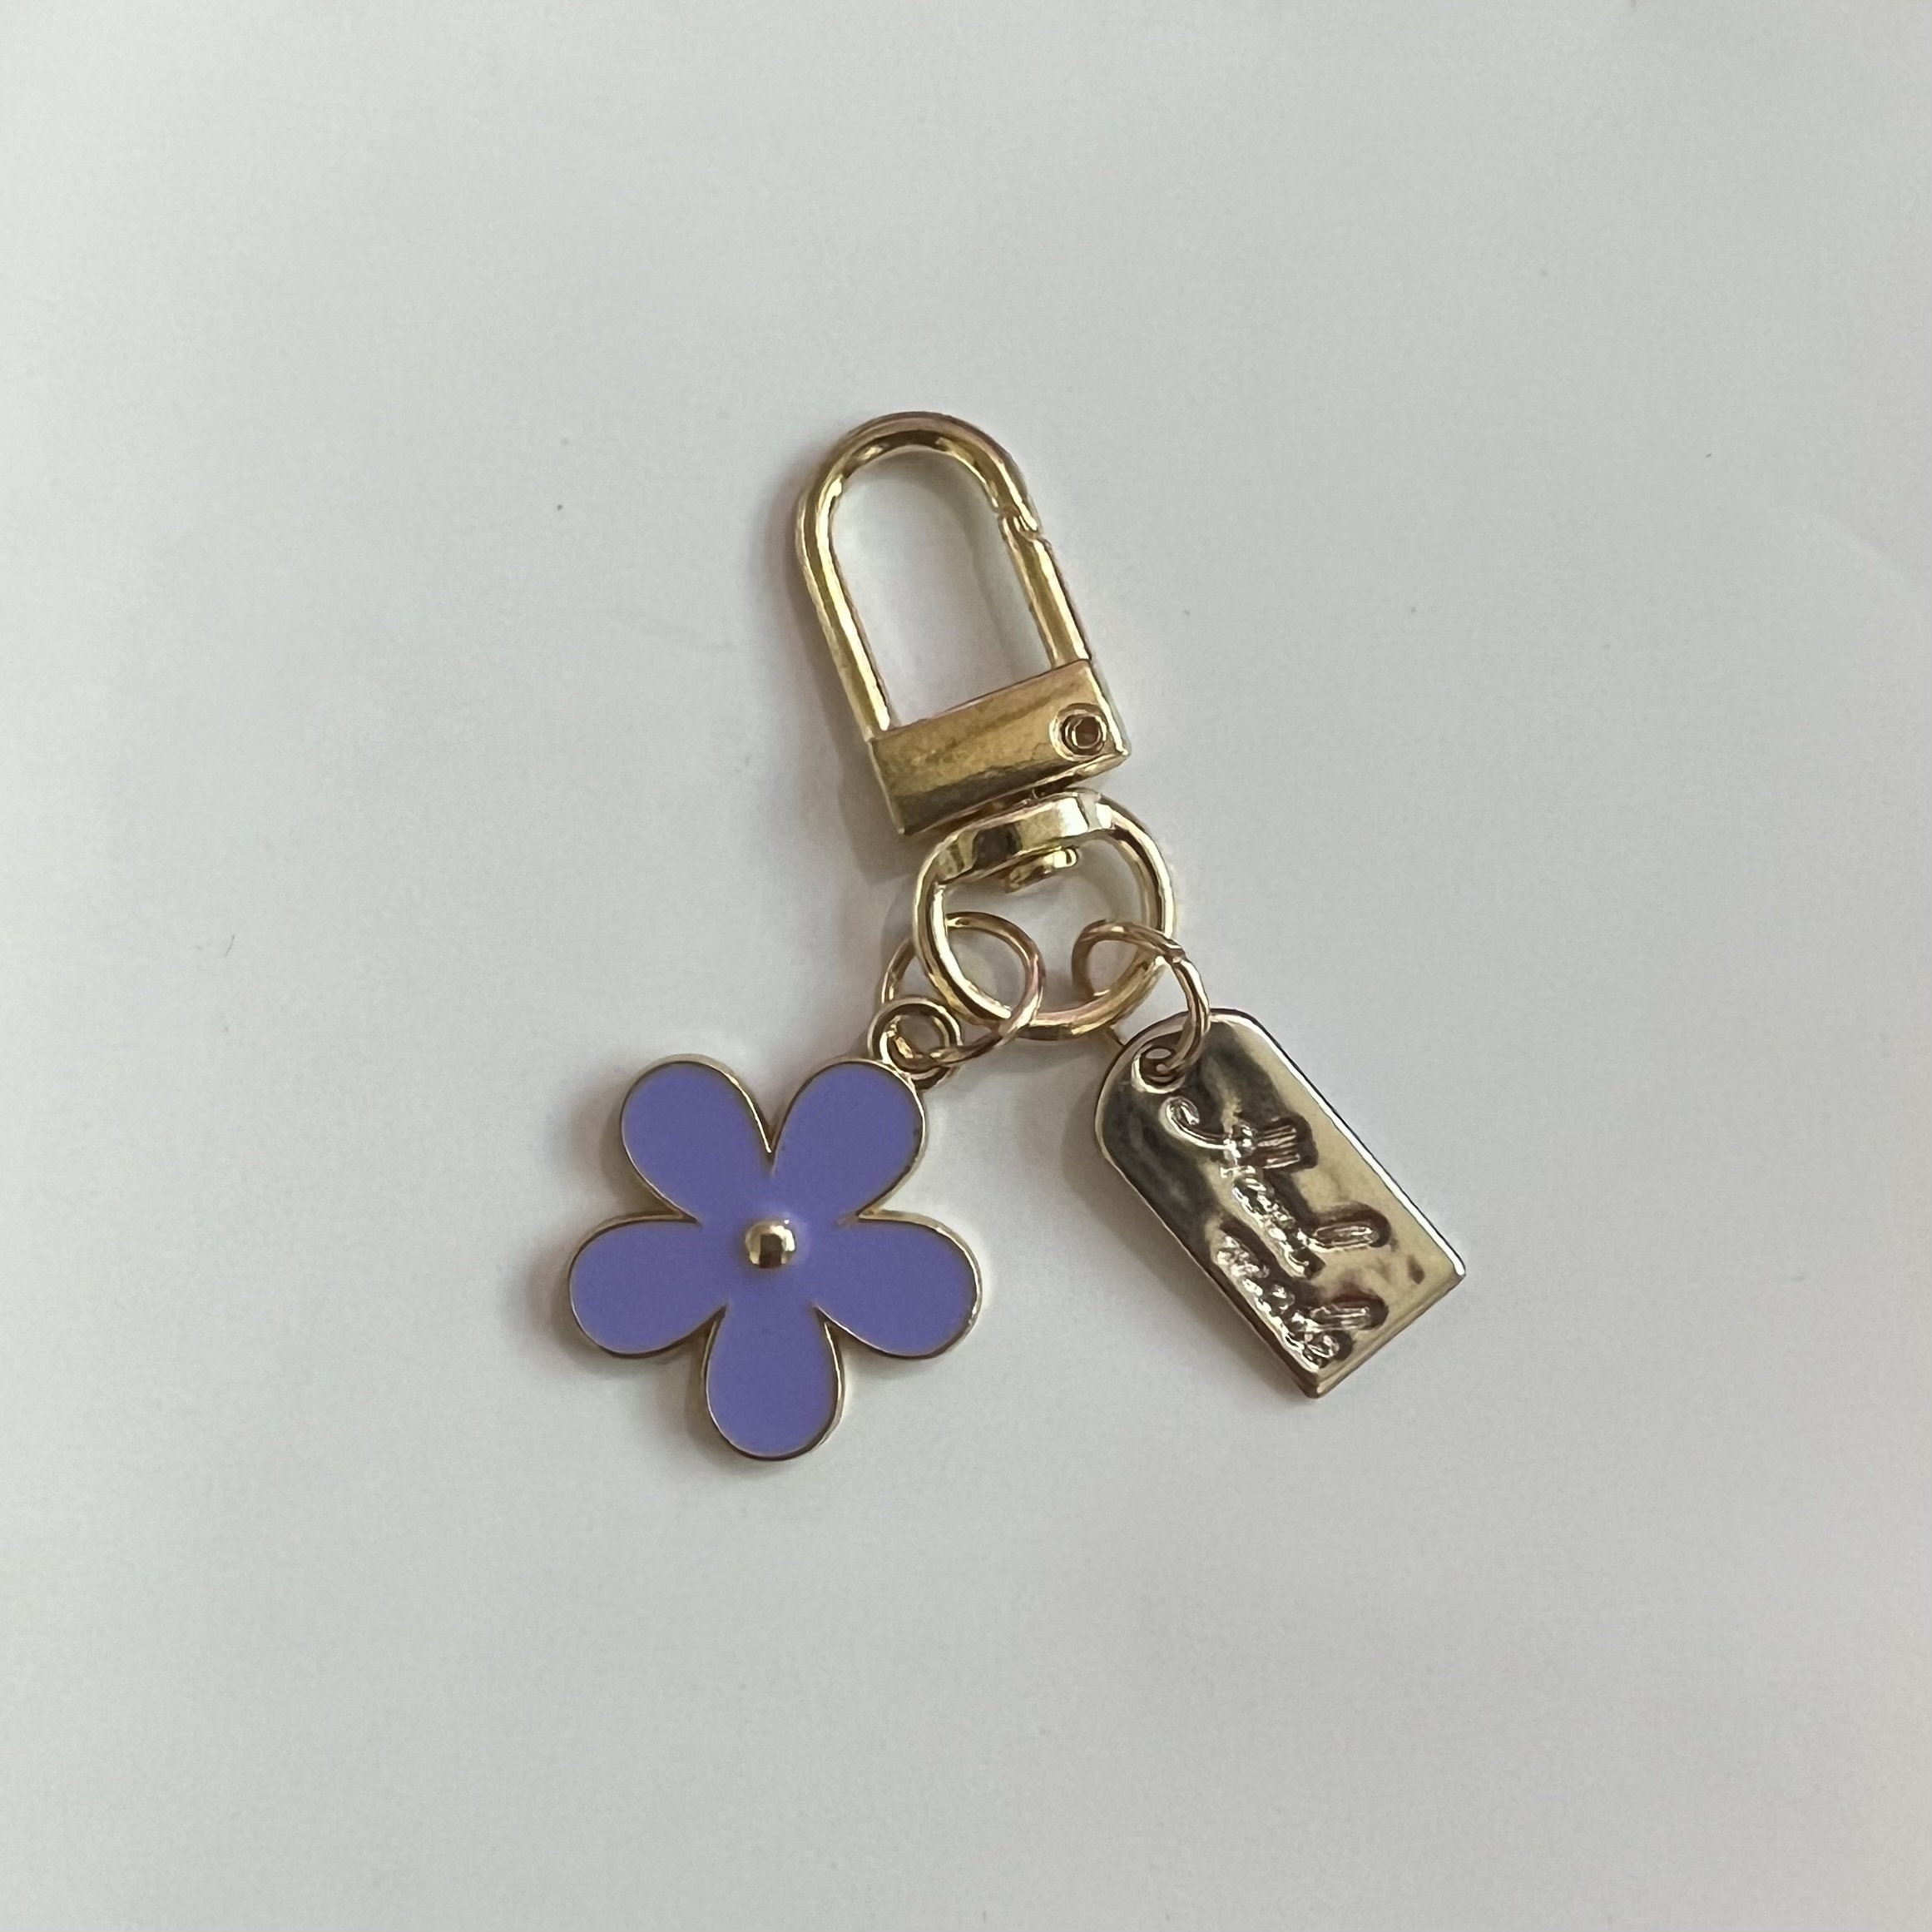 Louis Vuitton Style Lock, Key and Flower Charms Keychain/Bag Charm